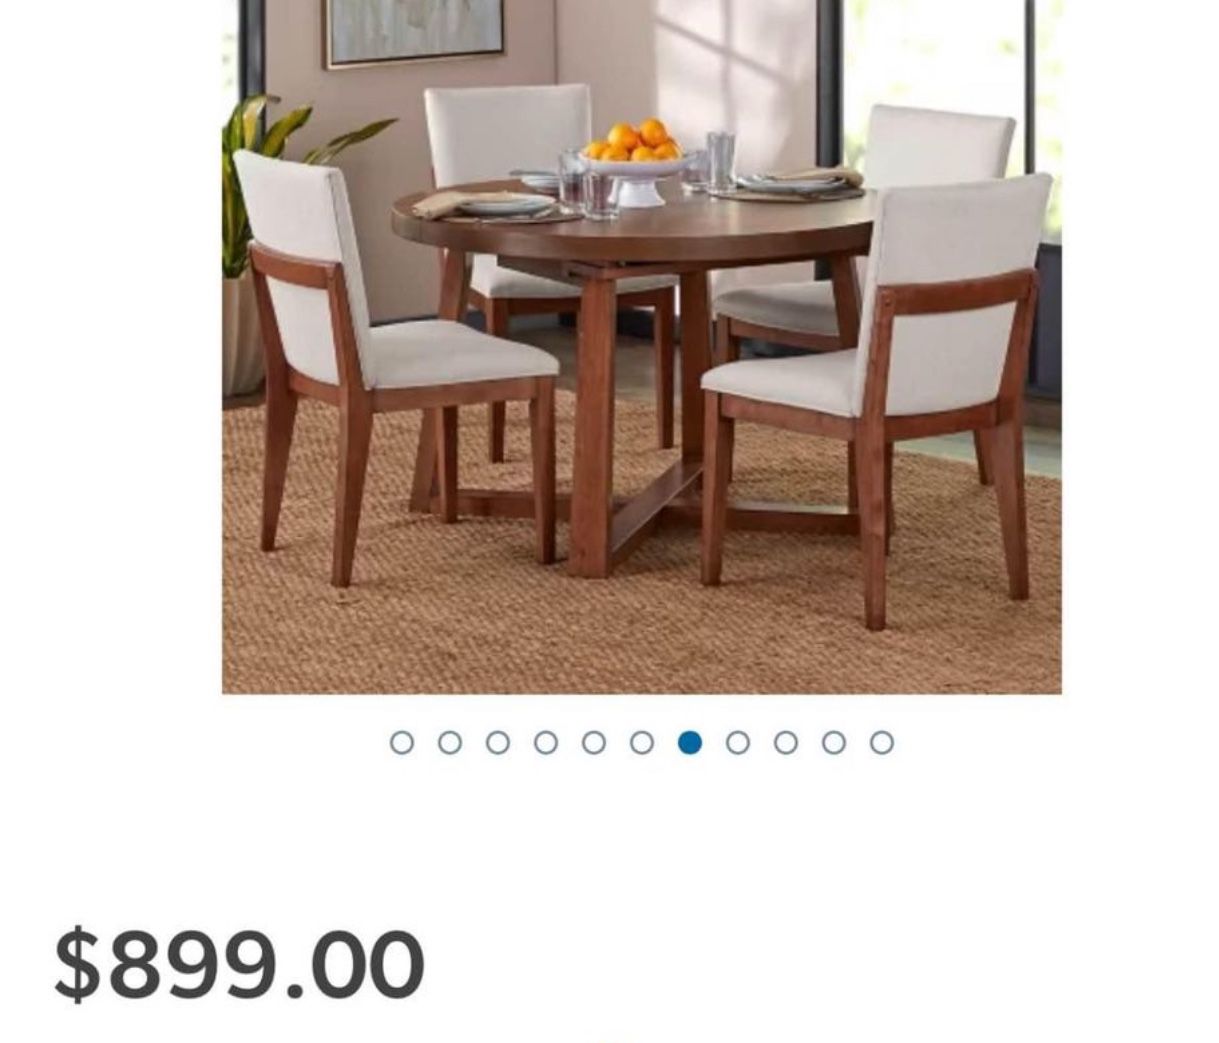 New Table With 6 Chairs